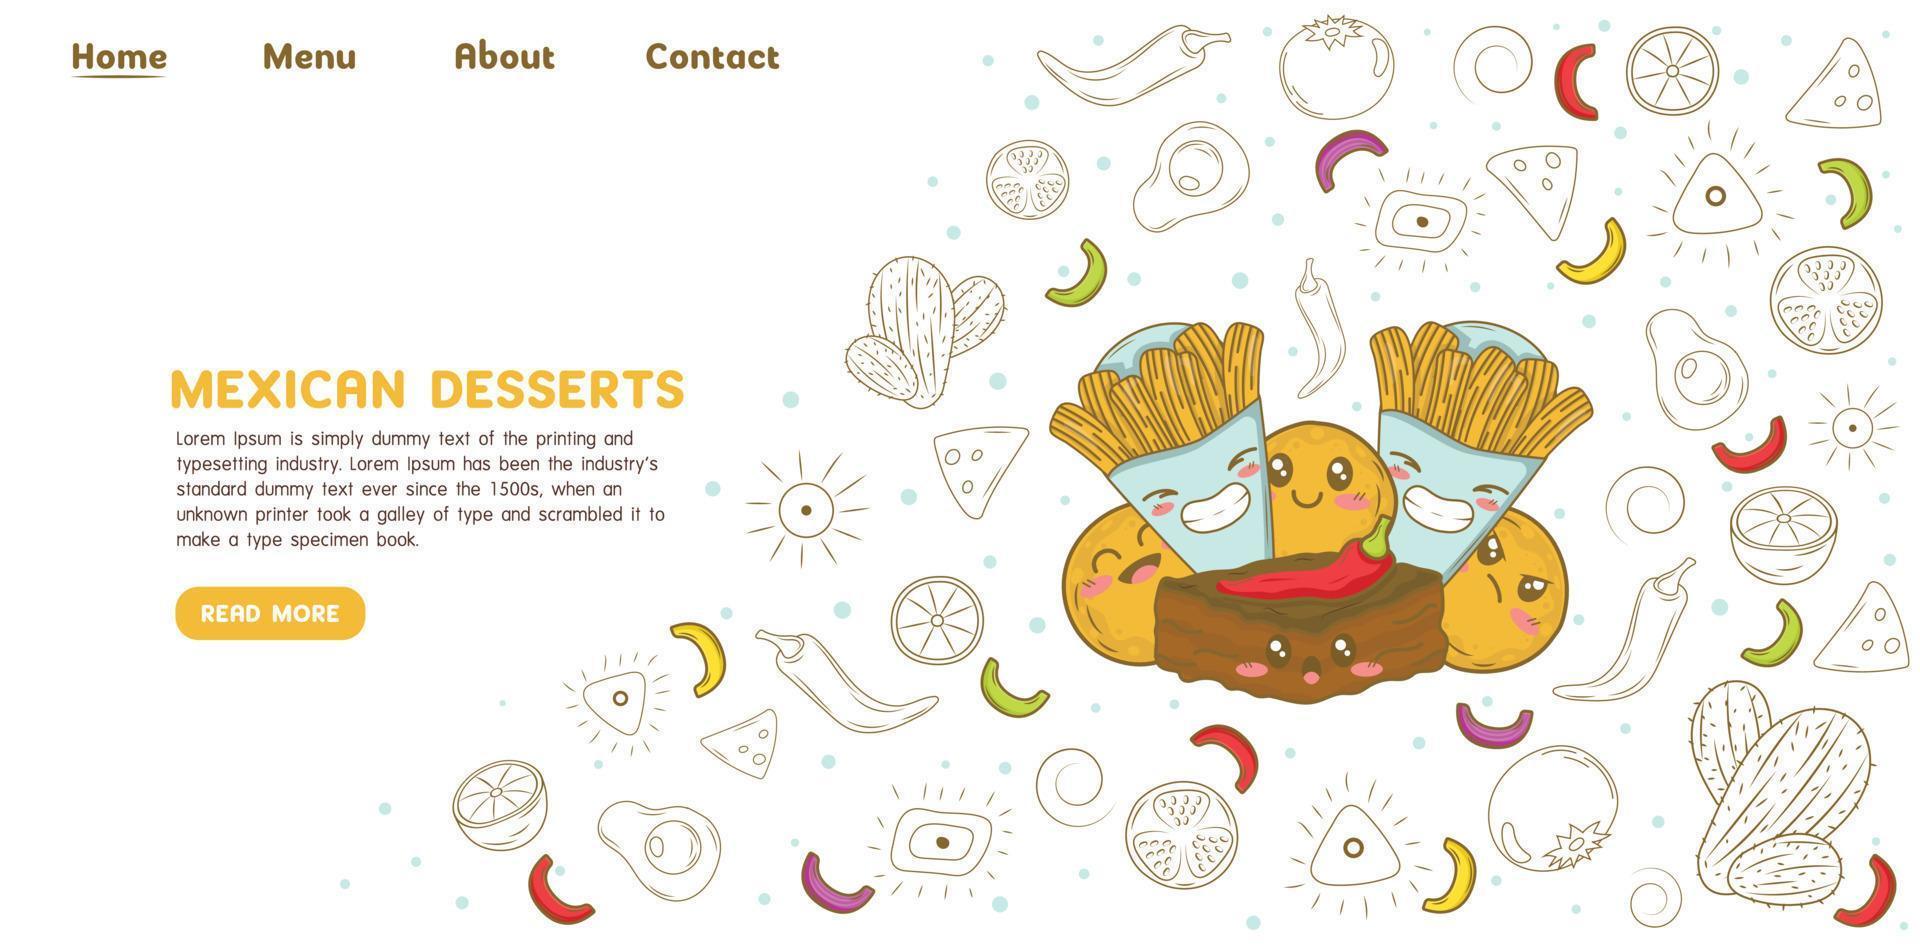 Mexican desserts donut churros and chili brownie landing page website template with doodle cartoon elements vector